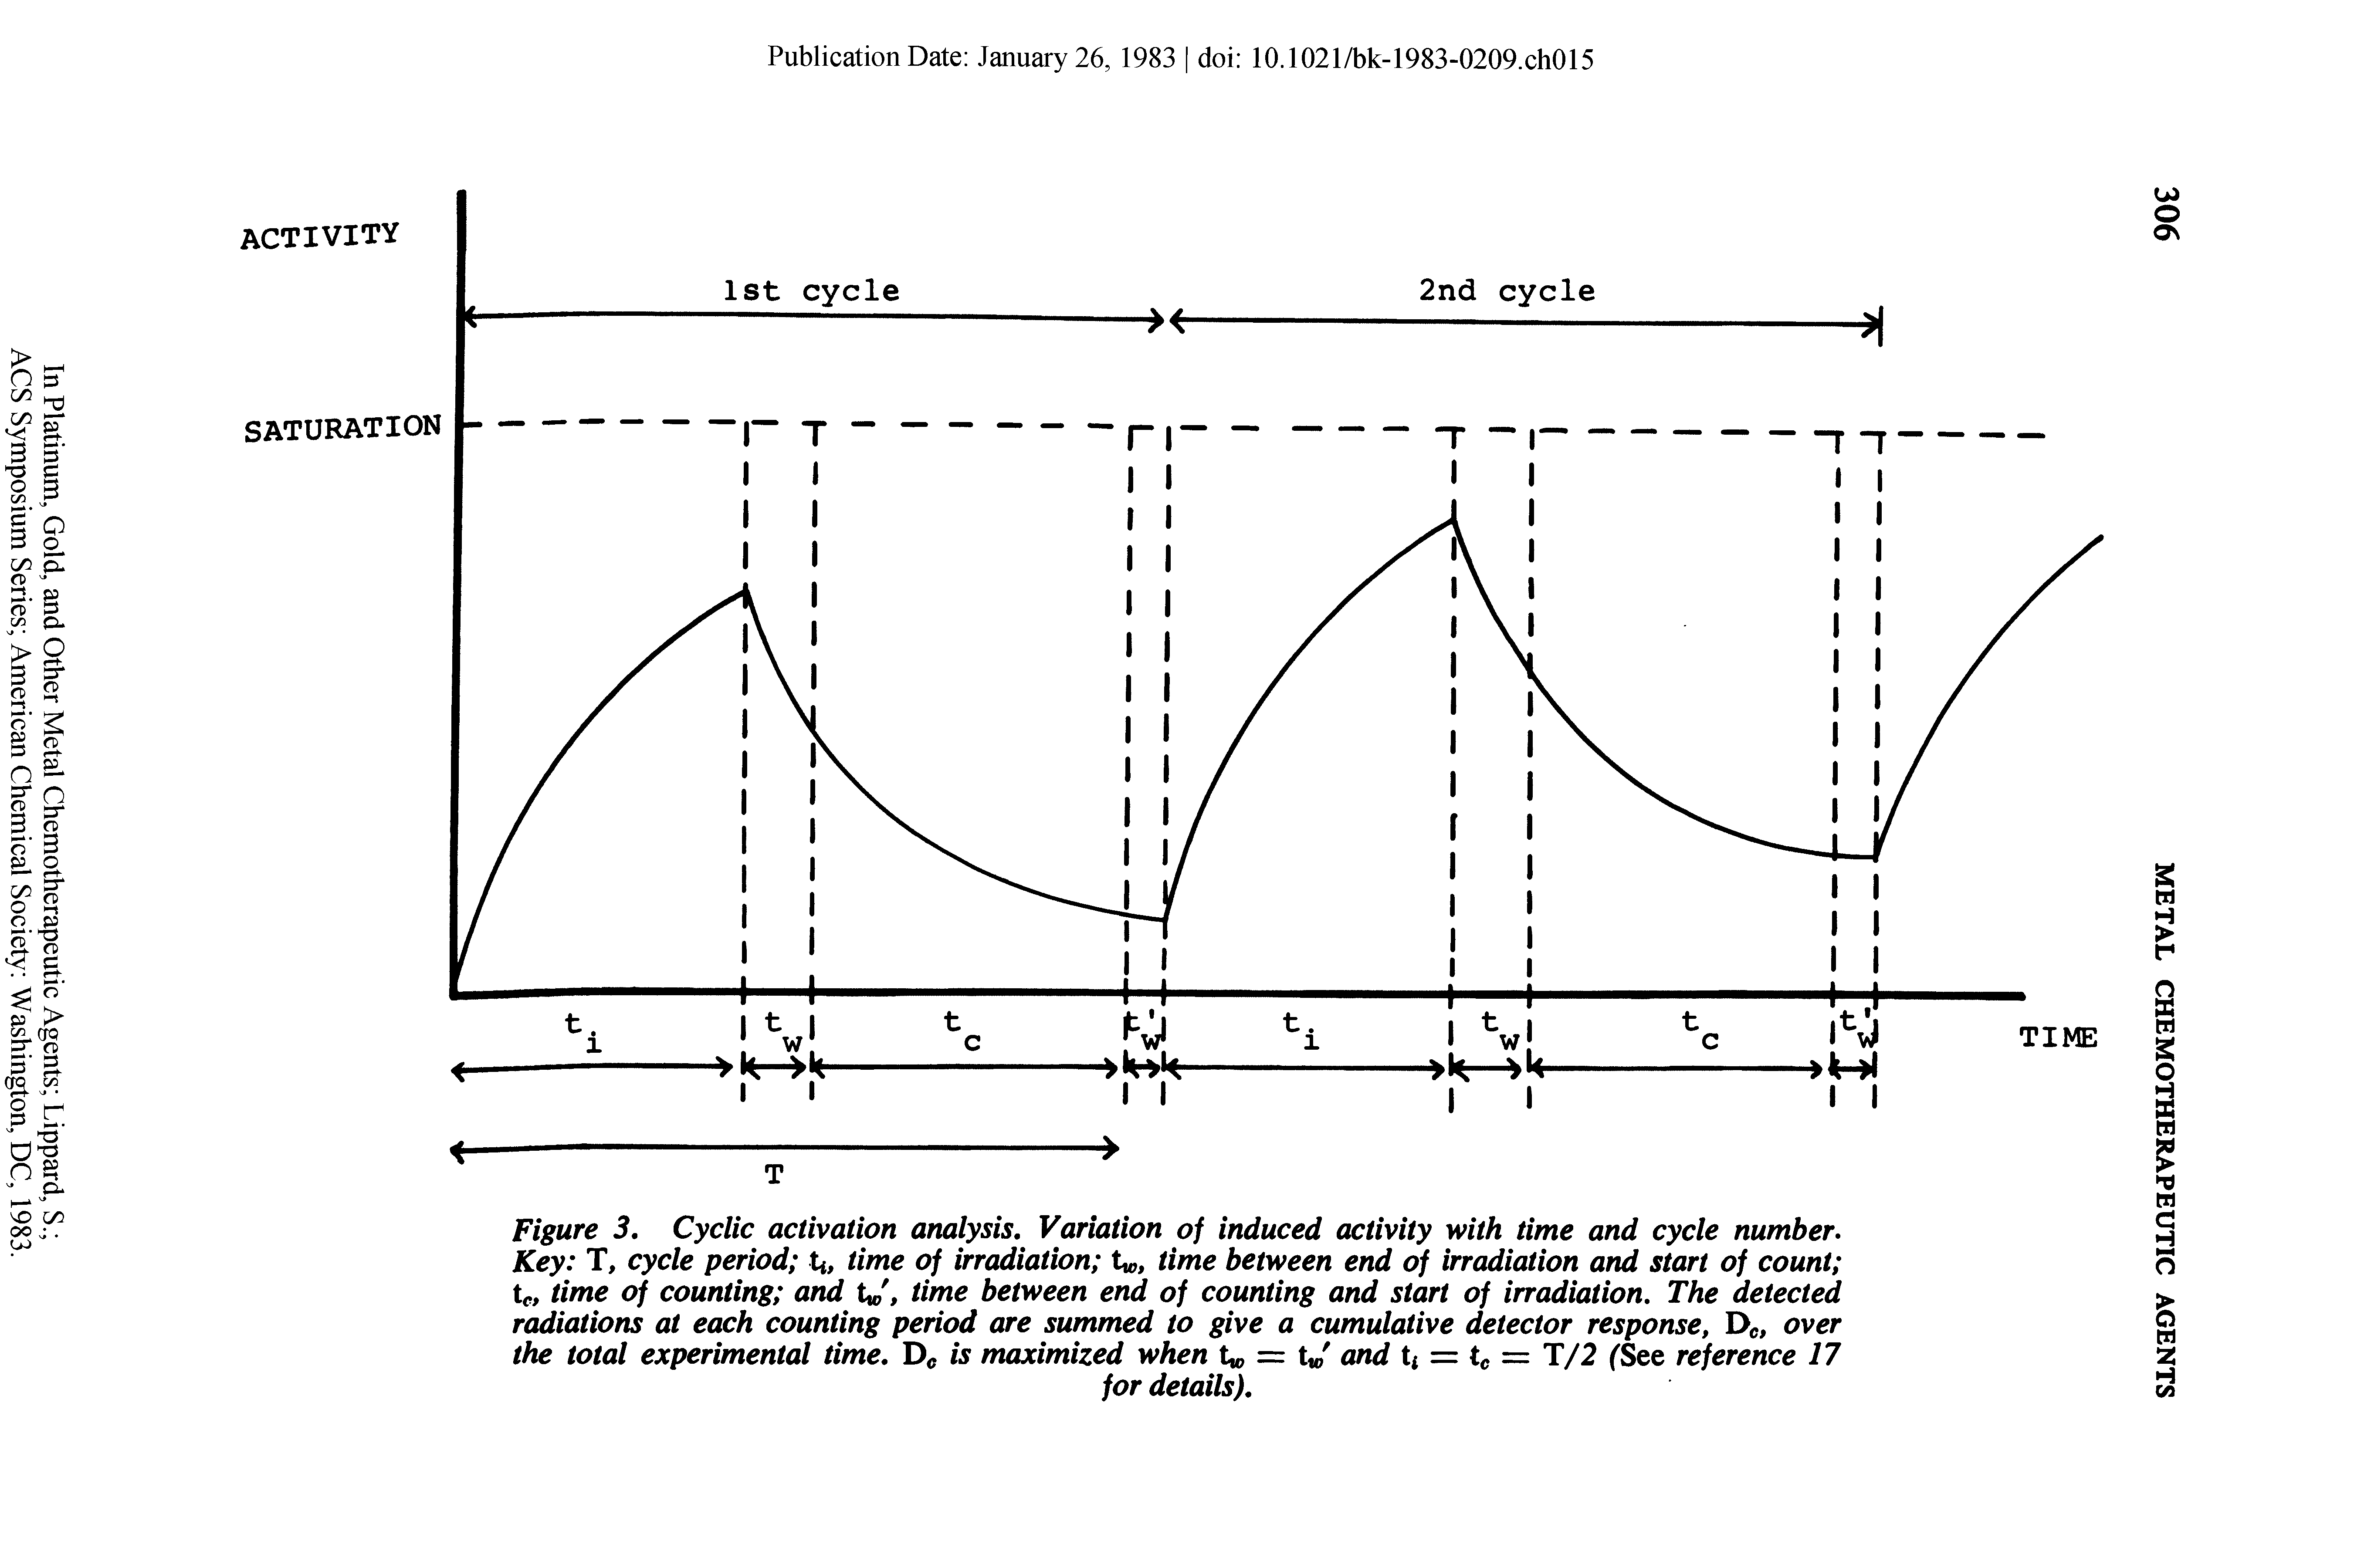 Figure 3, Cyclic activation analysis. Variation of induced activity with time and cycle number. Key T, cycle period tj, time of irradiation U, time between end of irradiation and start of count tc, time of counting and t ,, time between end of counting and start of irradiation. The detected radiations at each counting period are summed to give a cumulative detector response, Dc, over the total experimental time. Dc is maximized when = t , and tf = tc = T/2 ( See reference 17...